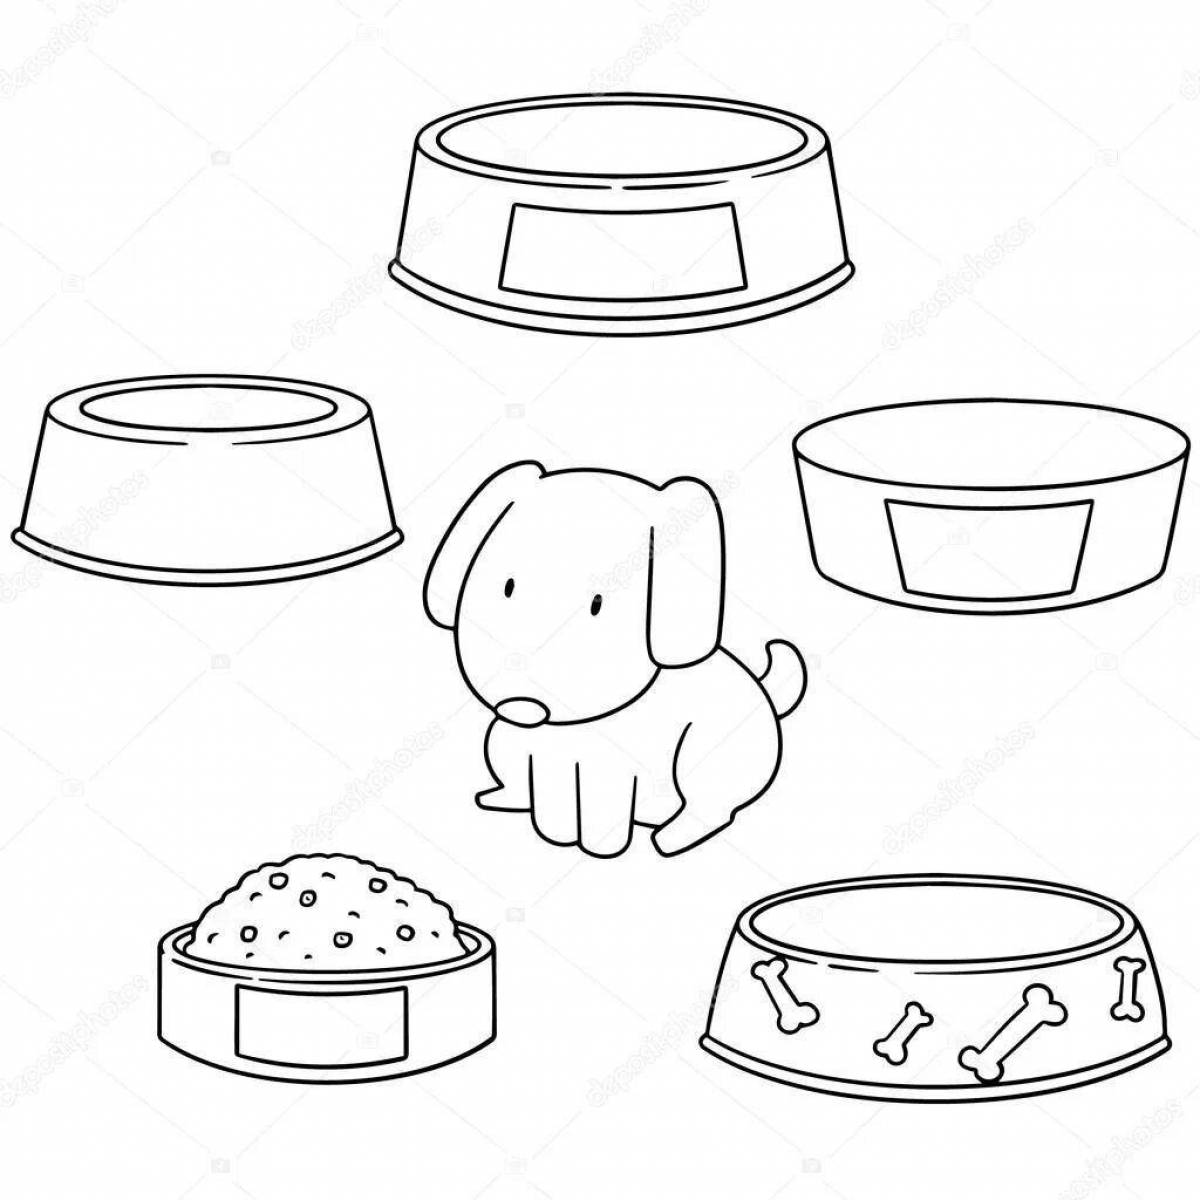 Cute dog bowl coloring page